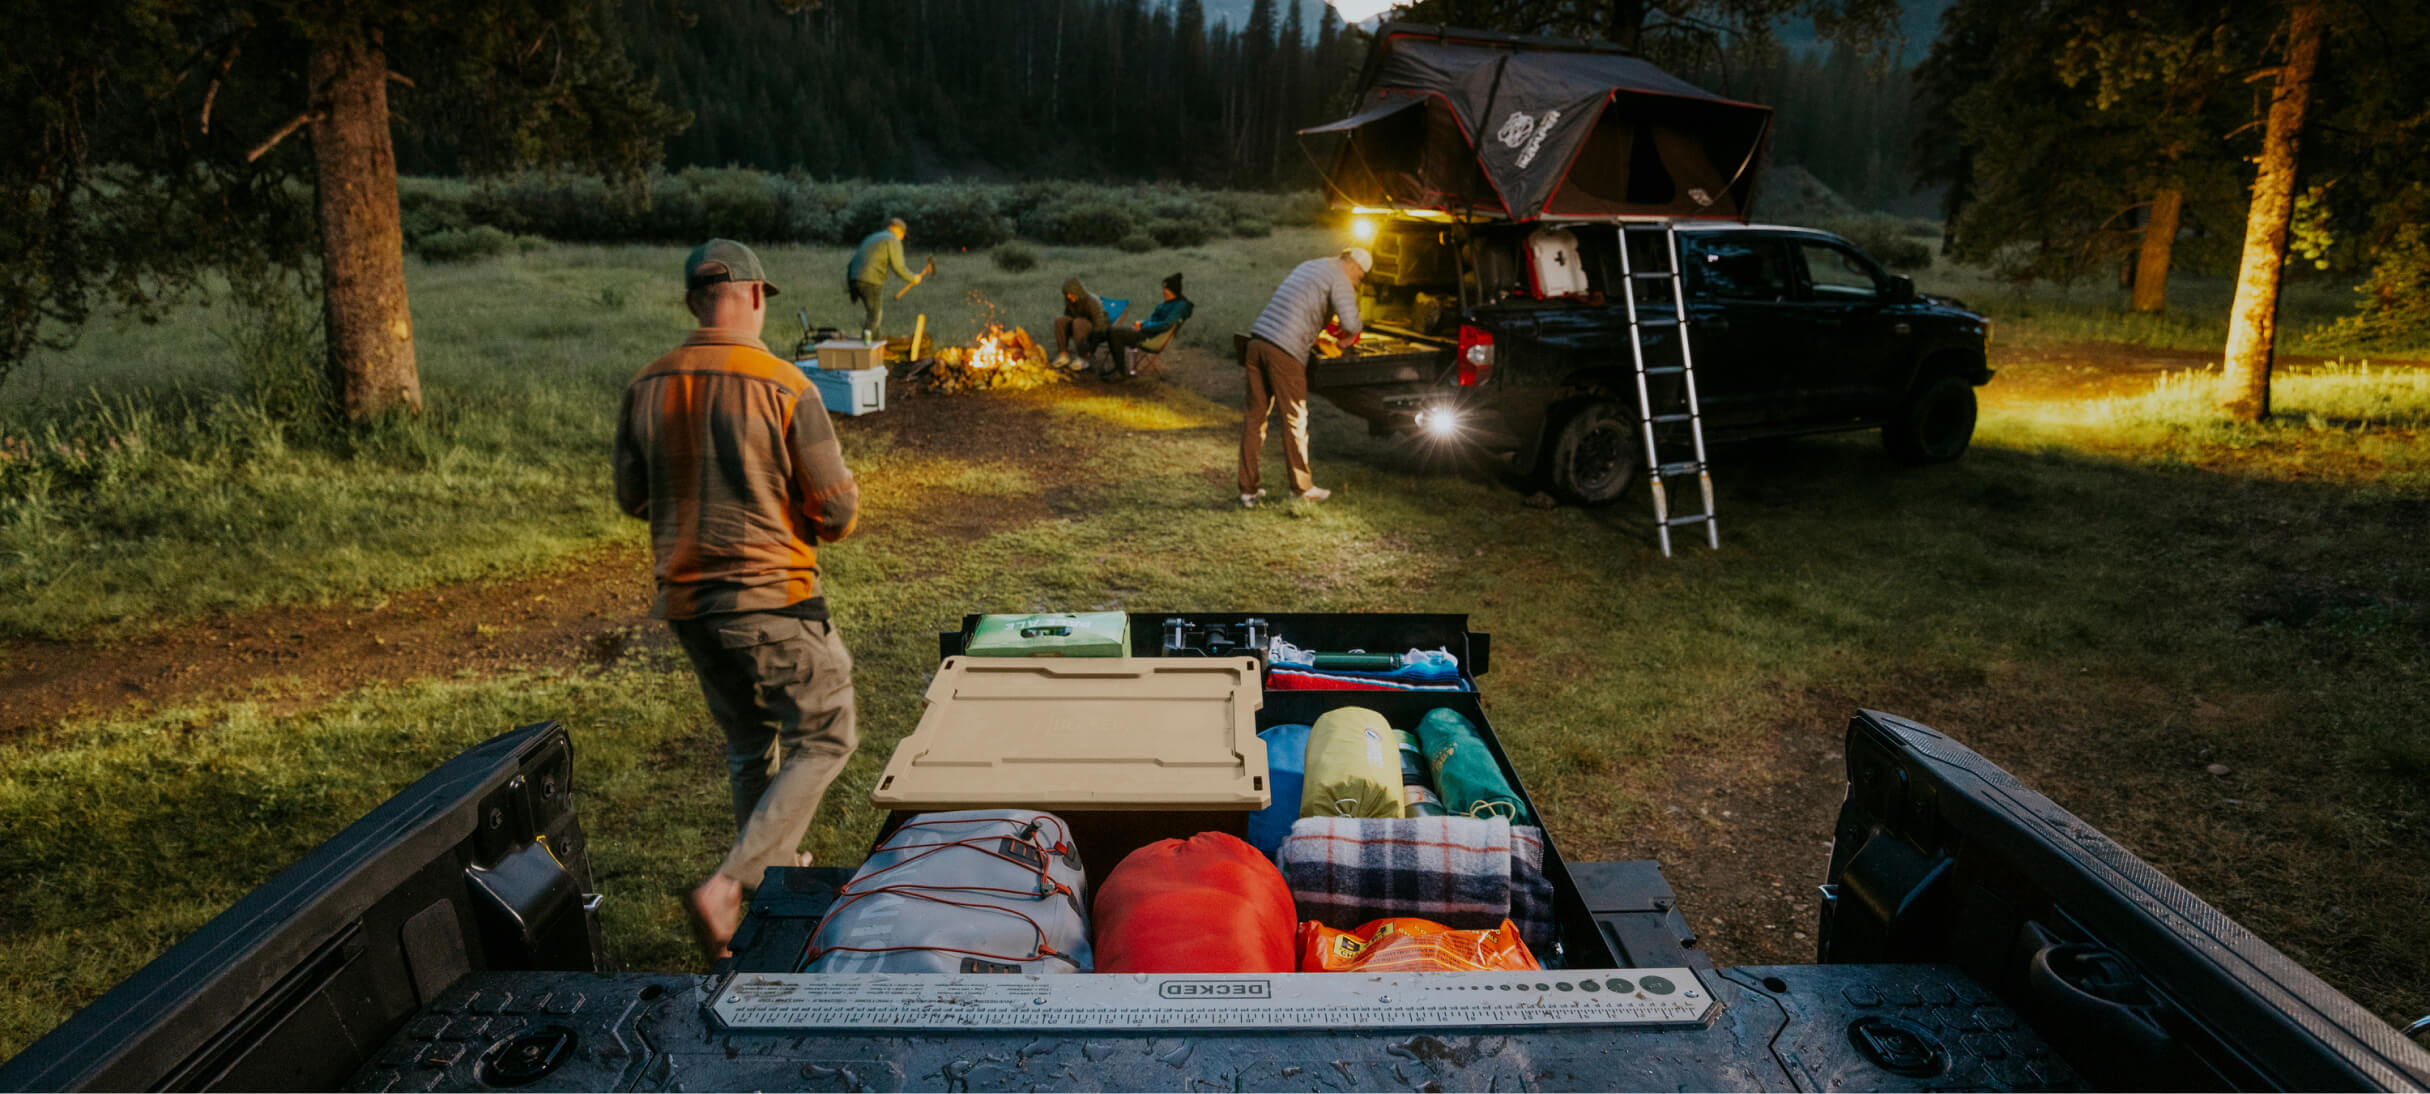 Midsize Drawer system being used to store camping gear while camping in the mountains